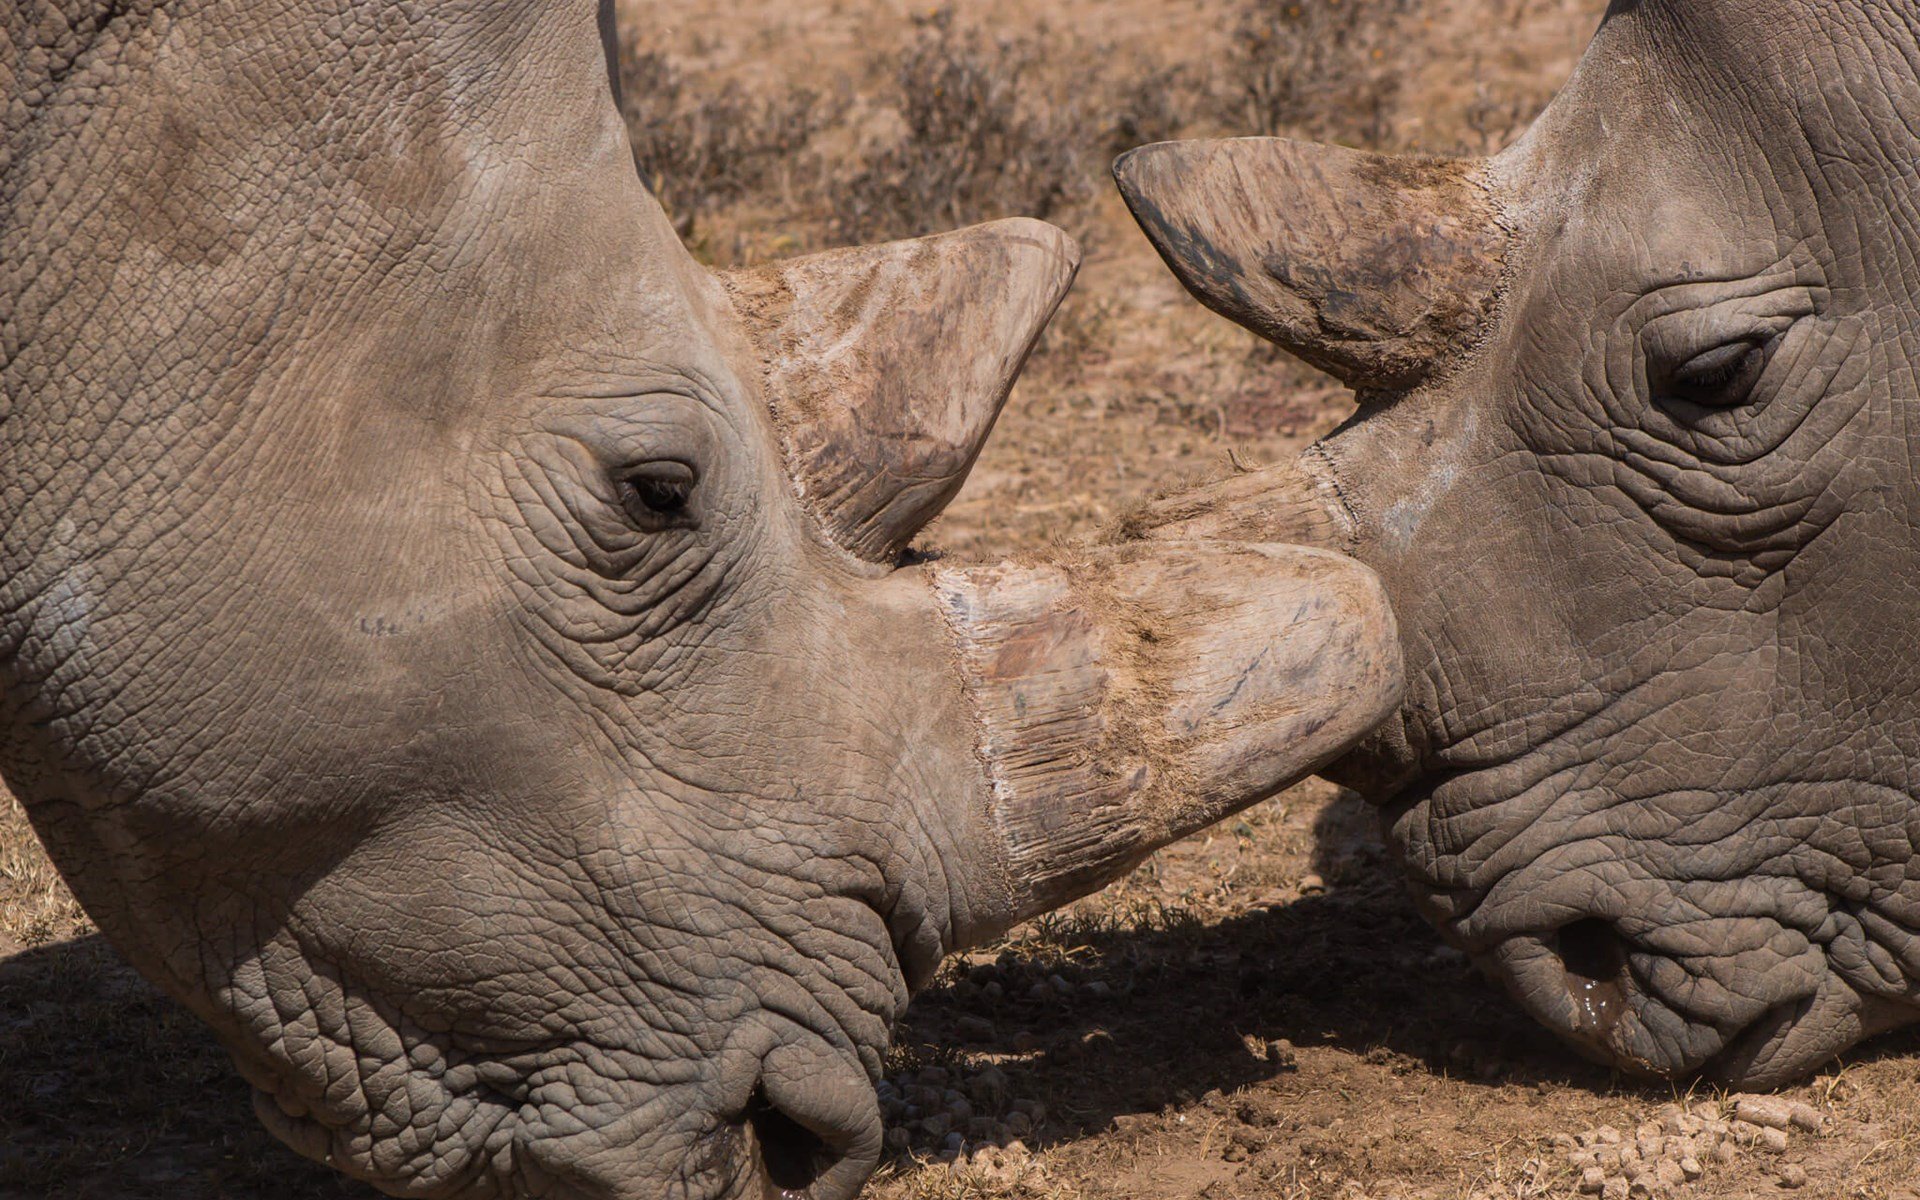 The Northern White Rhino Project